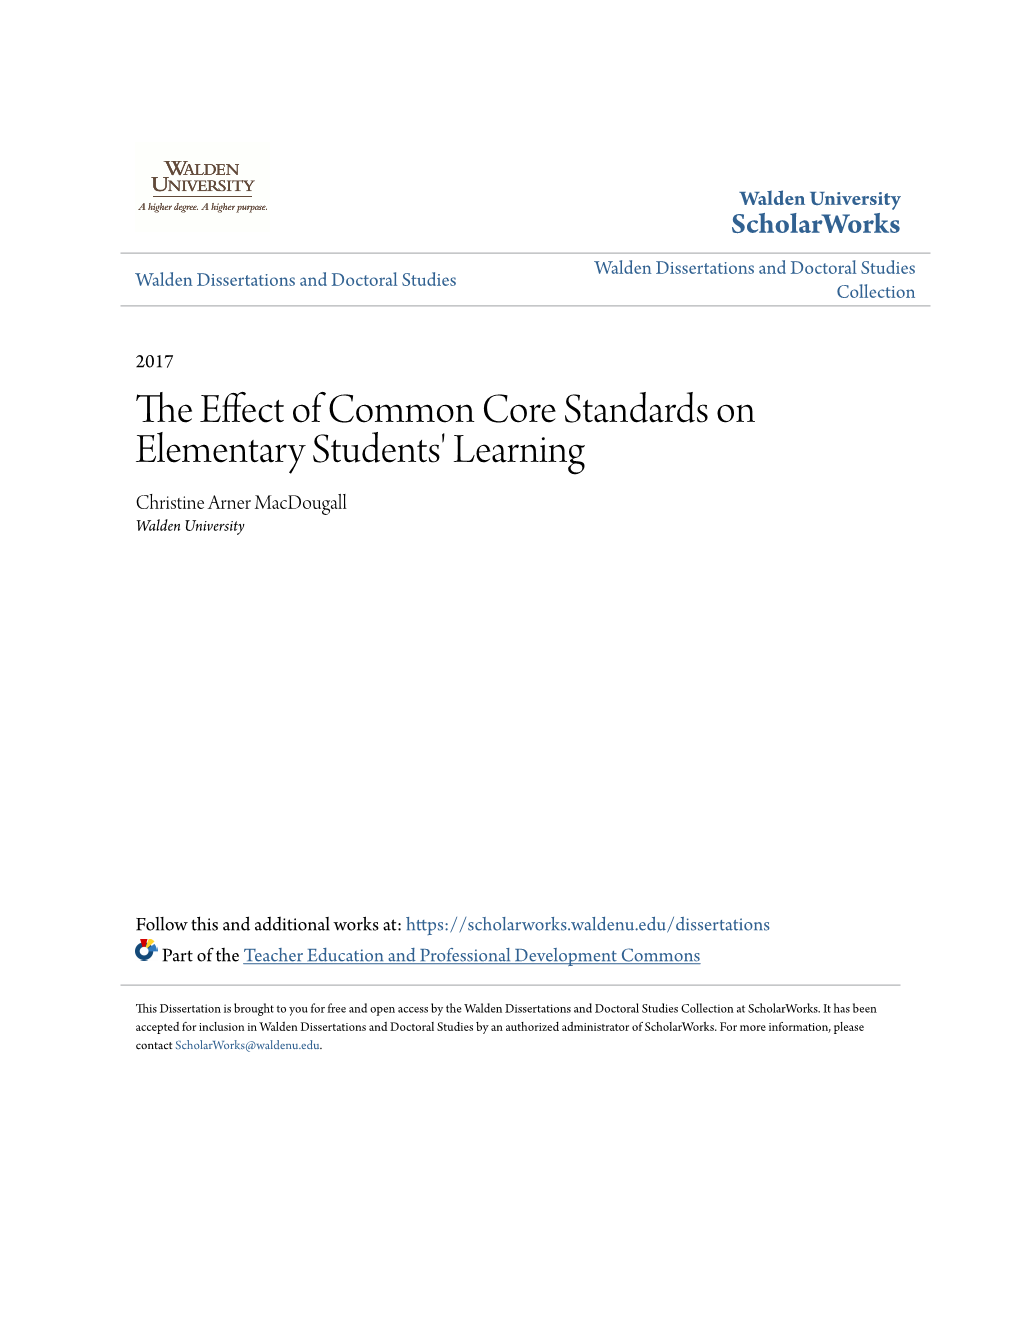 The Effect of Common Core Standards on Elementary Students' Learning